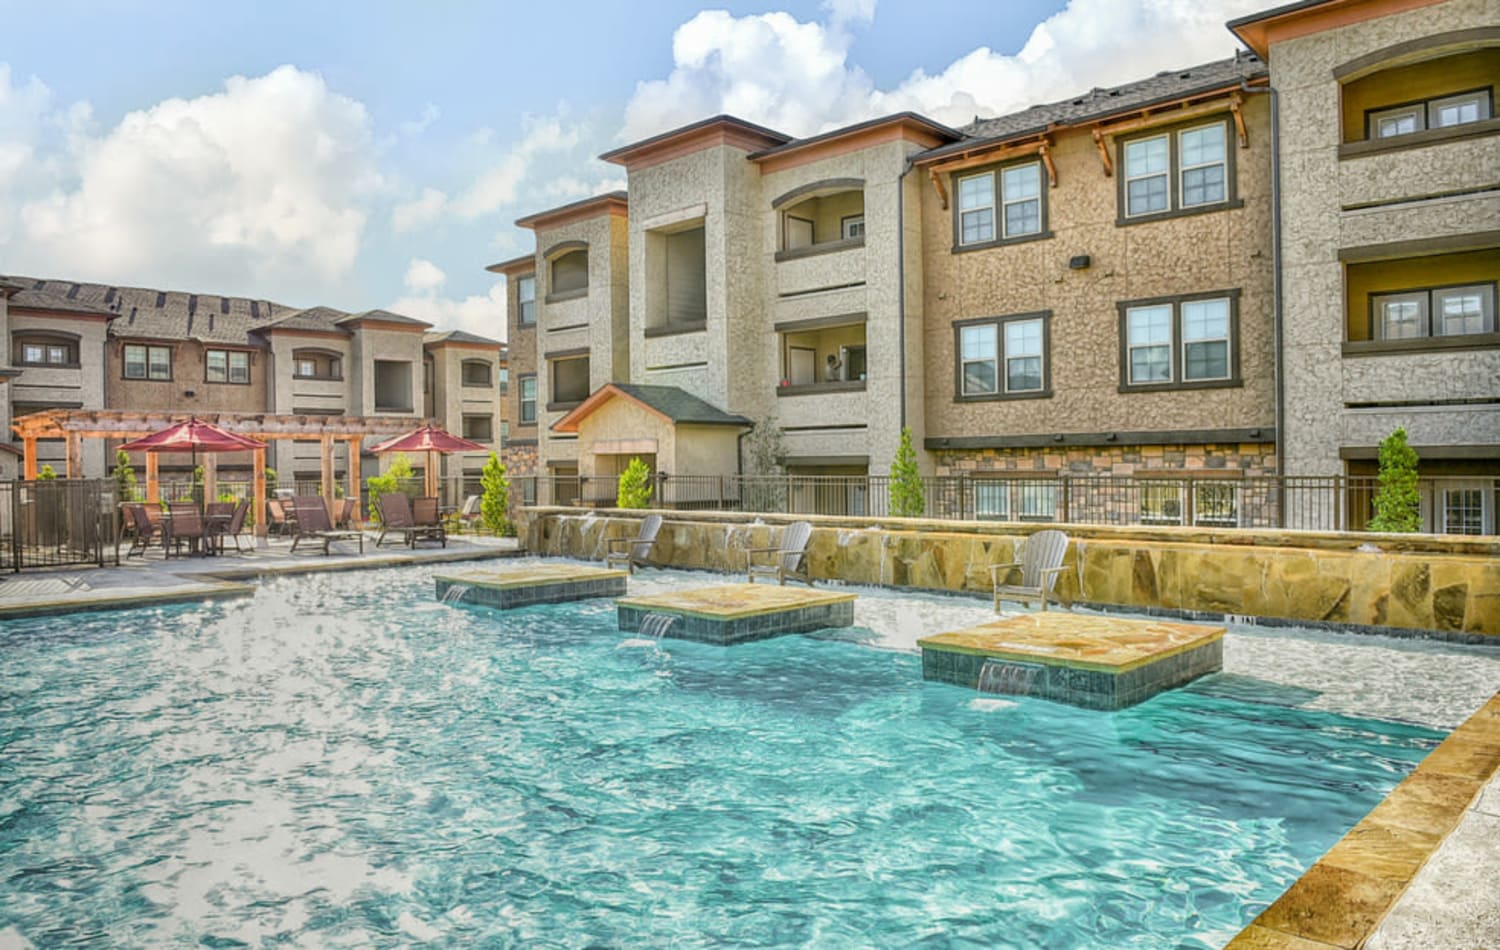 A large, beautiful pool at Overlook Ranch in Fort Worth, Texas